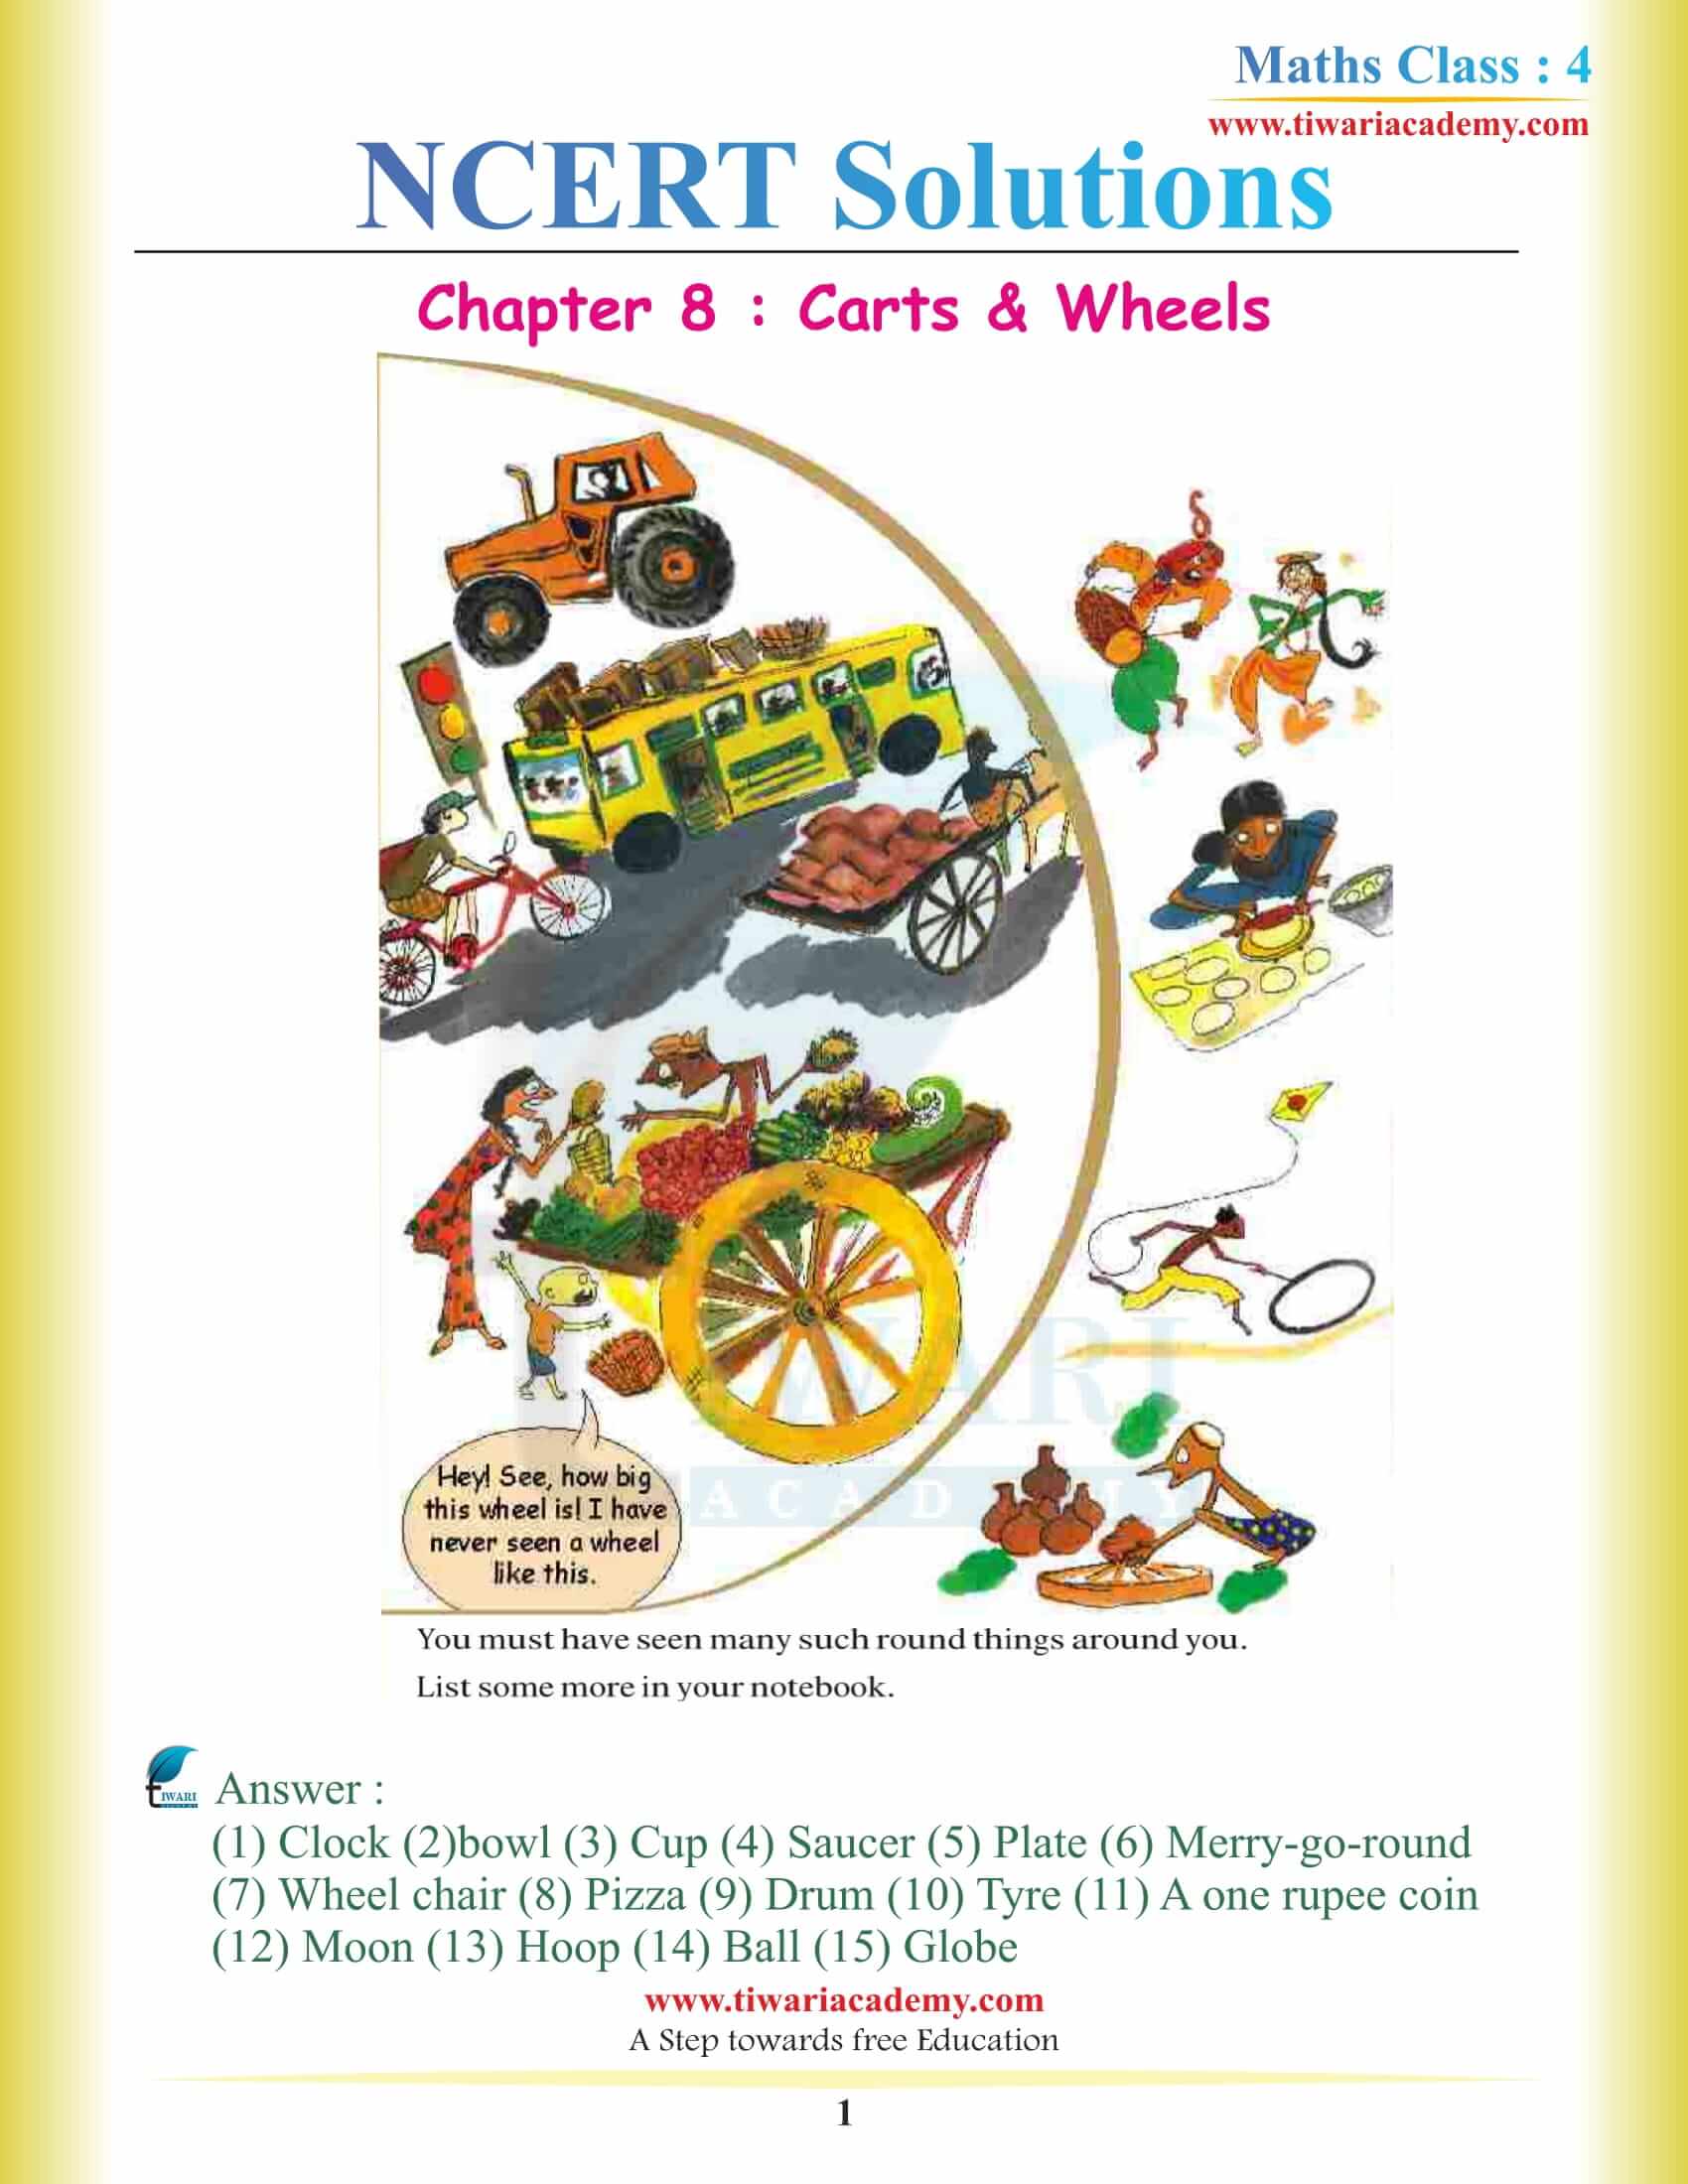 NCERT Solutions for Class 4 Maths Chapter 8 Carts and Wheels